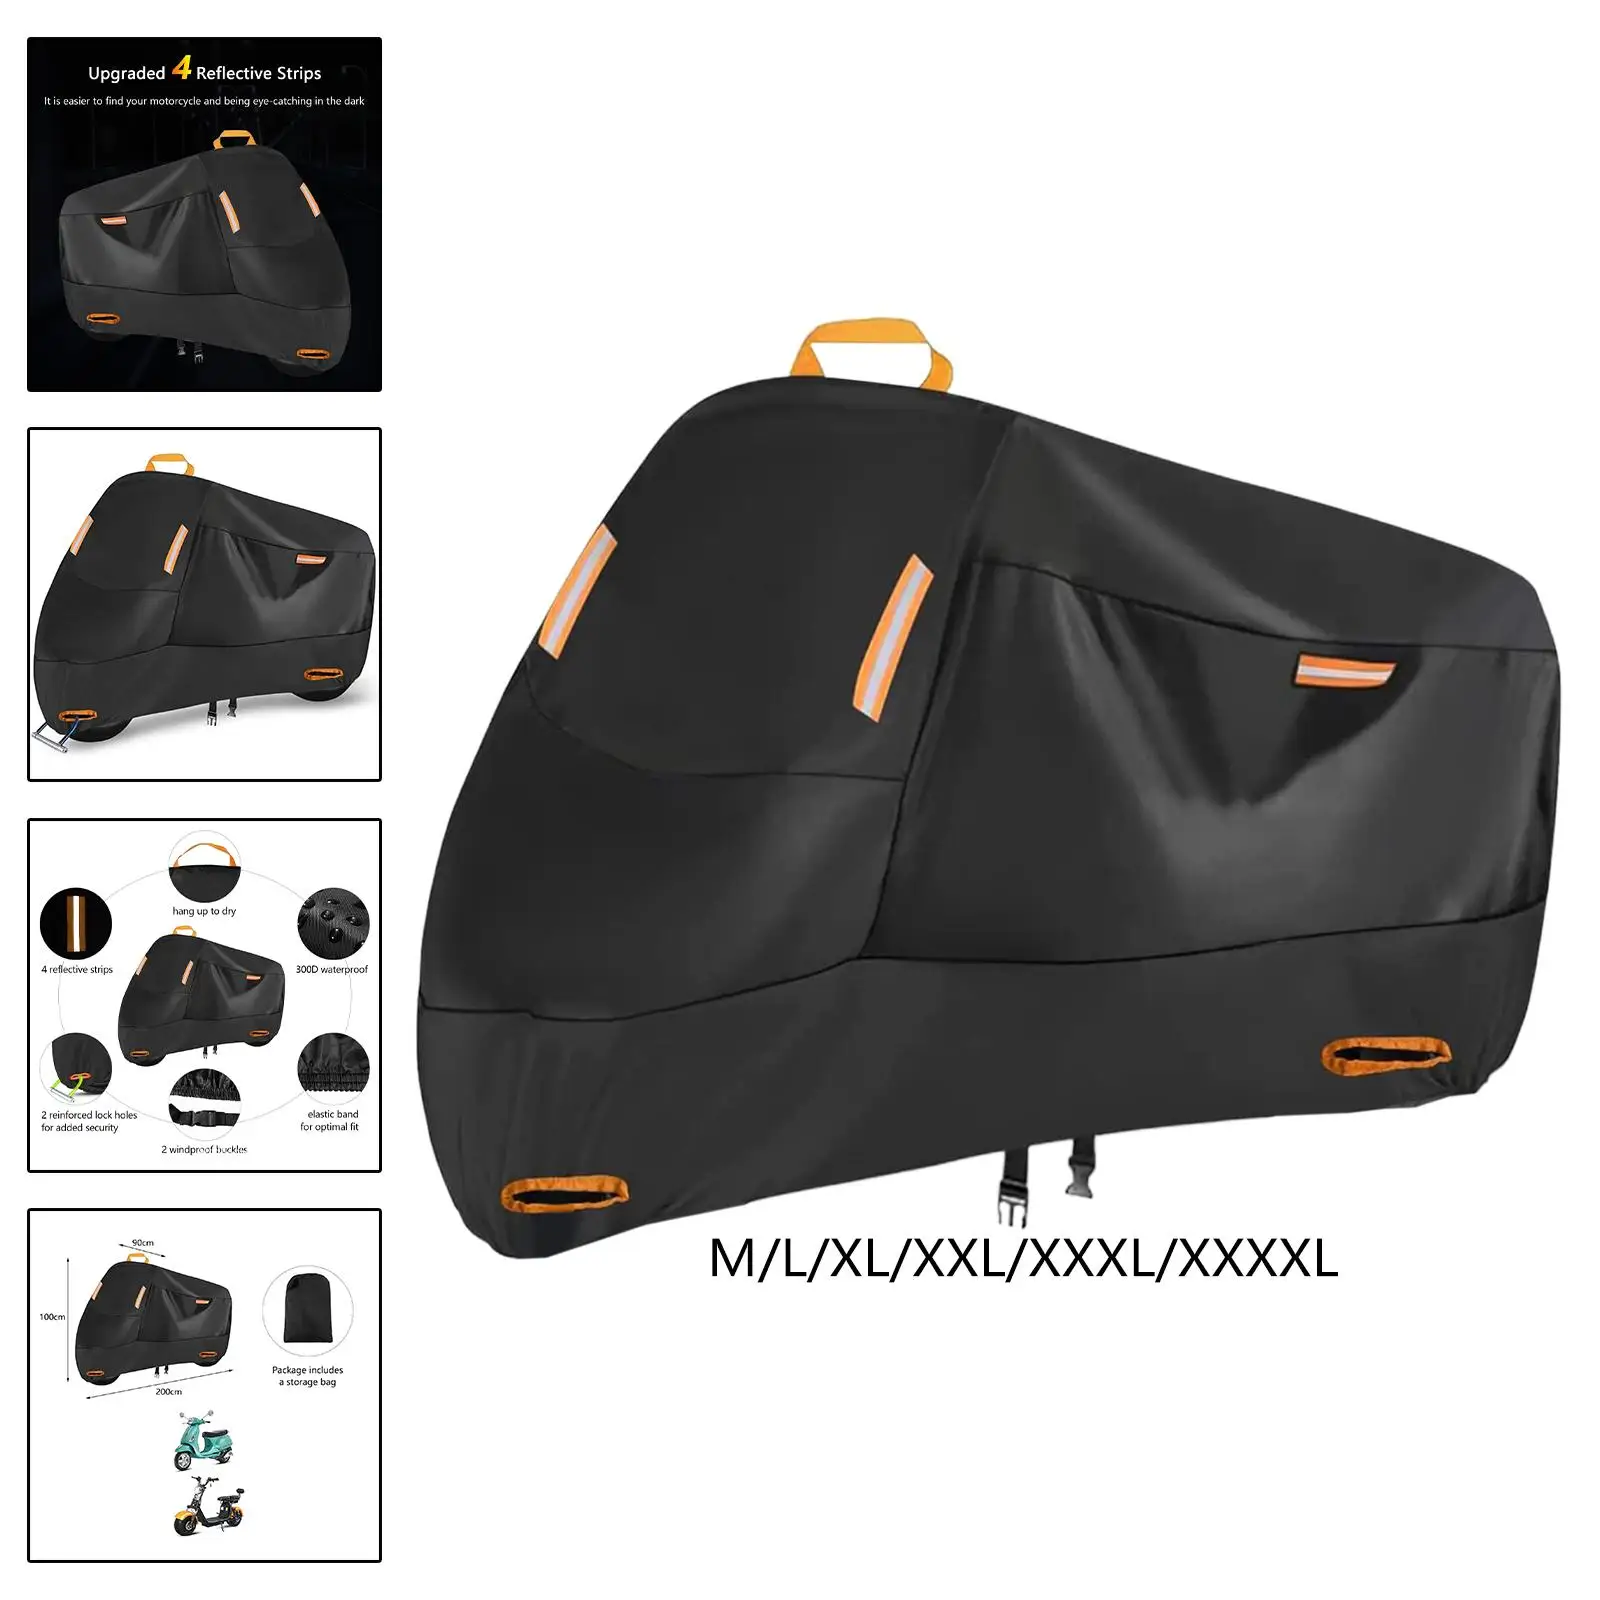 Motorcycle Cover Motorbike Cover for Motorbike Bike Outdoor Protection